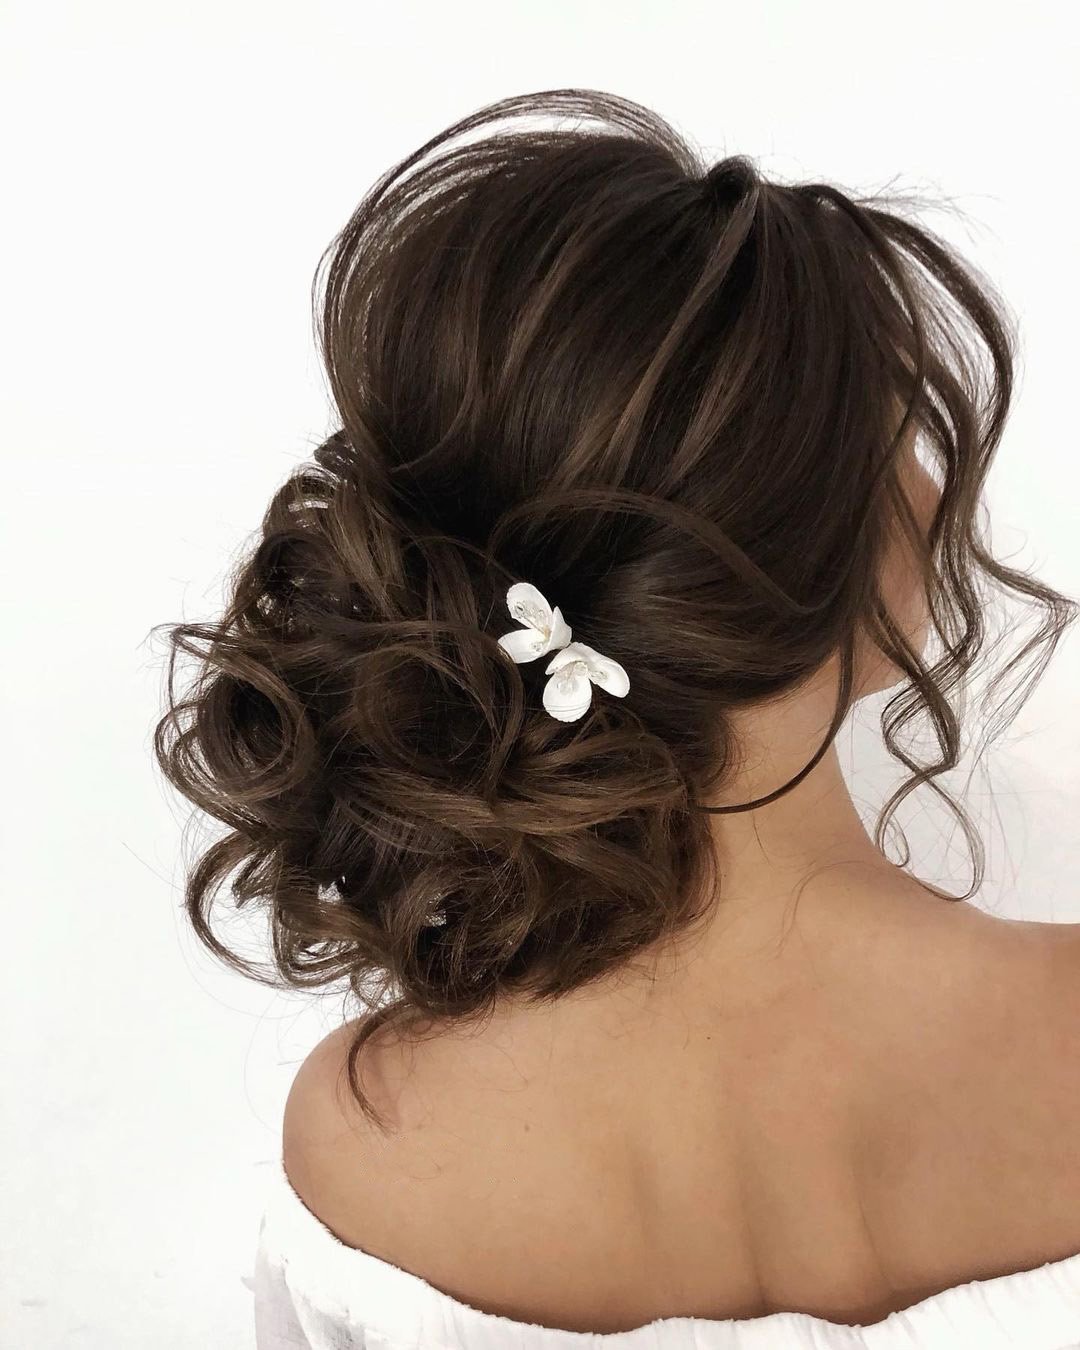 wedding updos for long hair low updo with curls juliafratichelli.bridalstylist